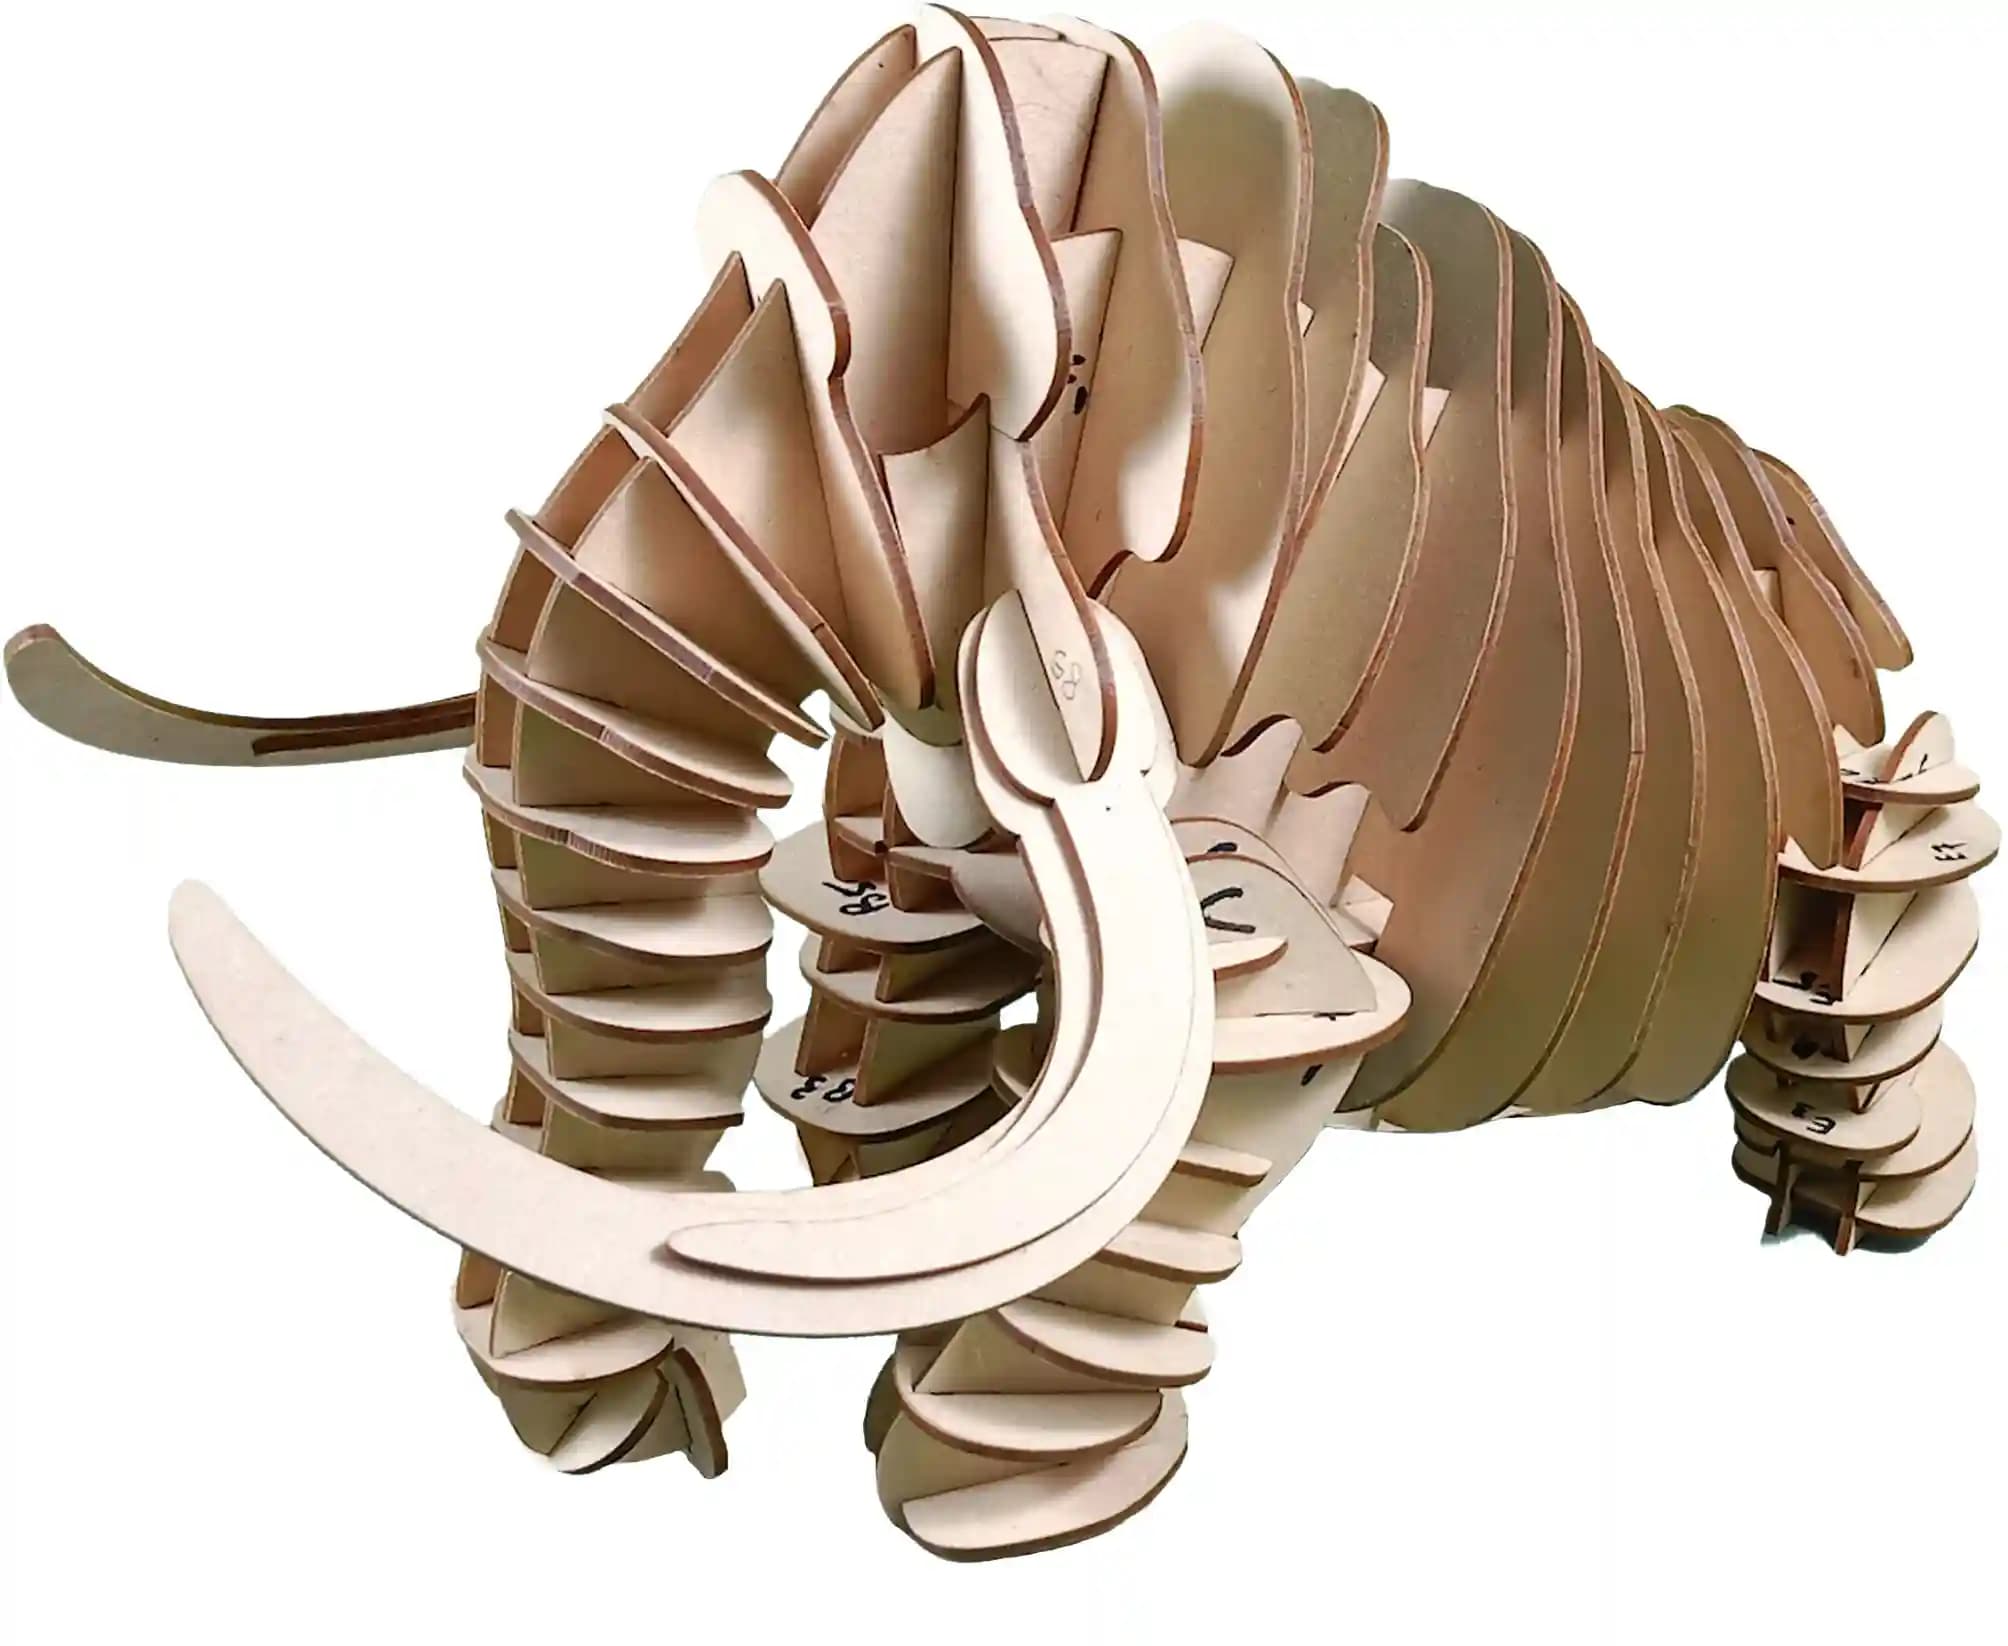 3D Model of Mammoth in Form of Puzzle DIY KIT